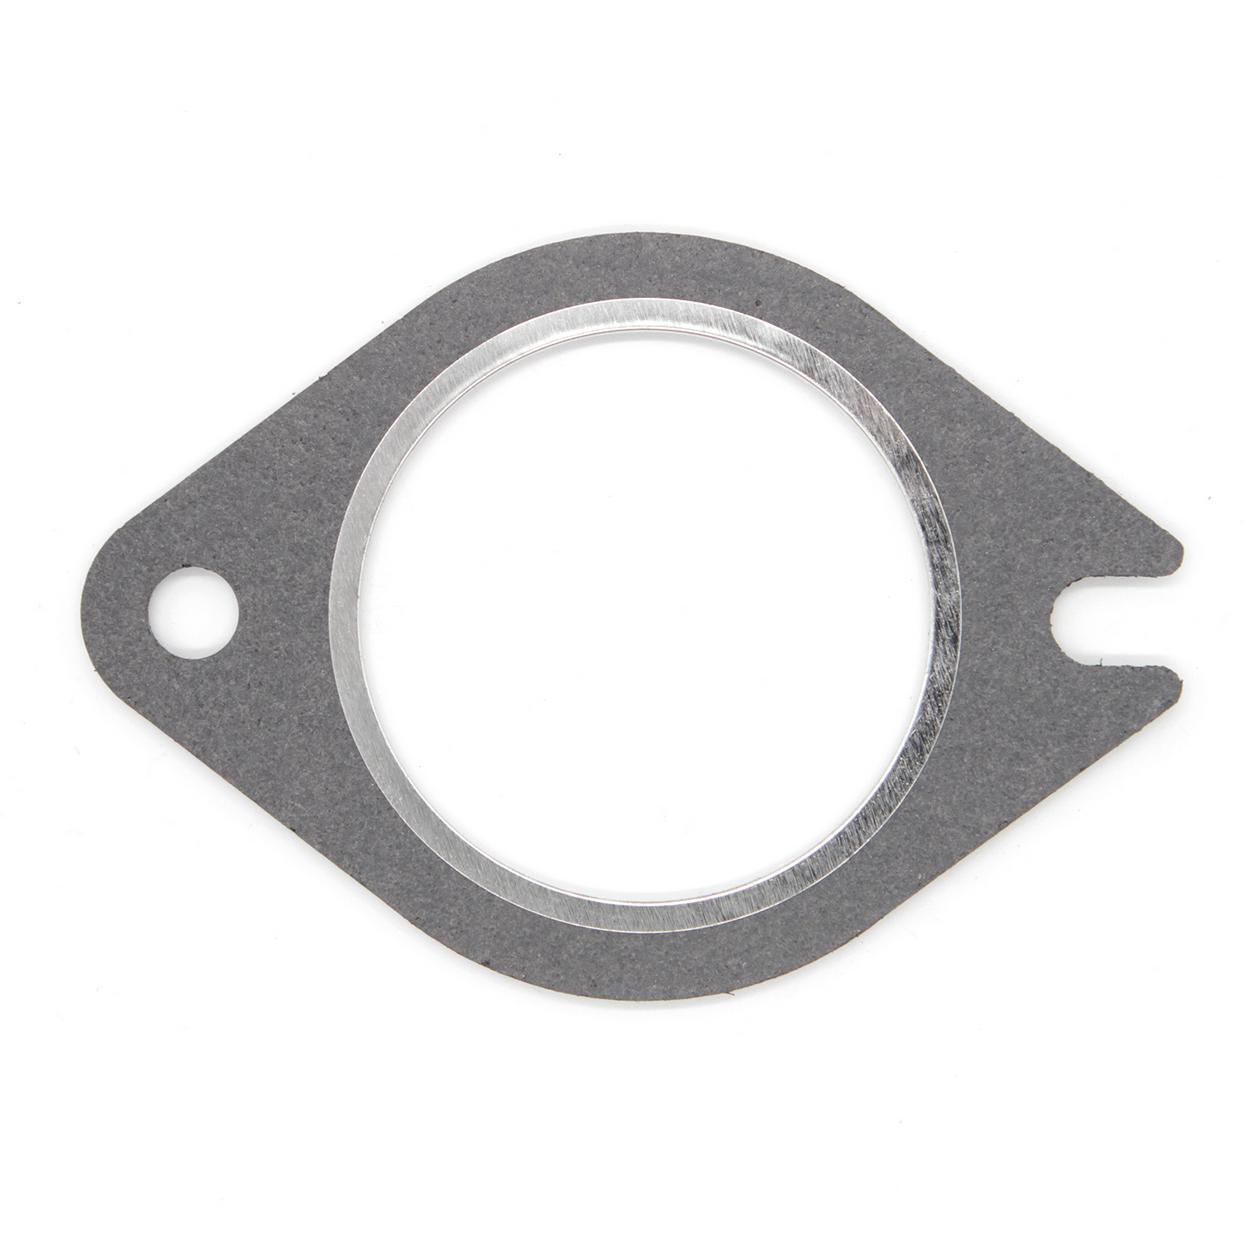 N/A Exhaust Pipe Flange Gasket Fits 1983 Ford Fairmont